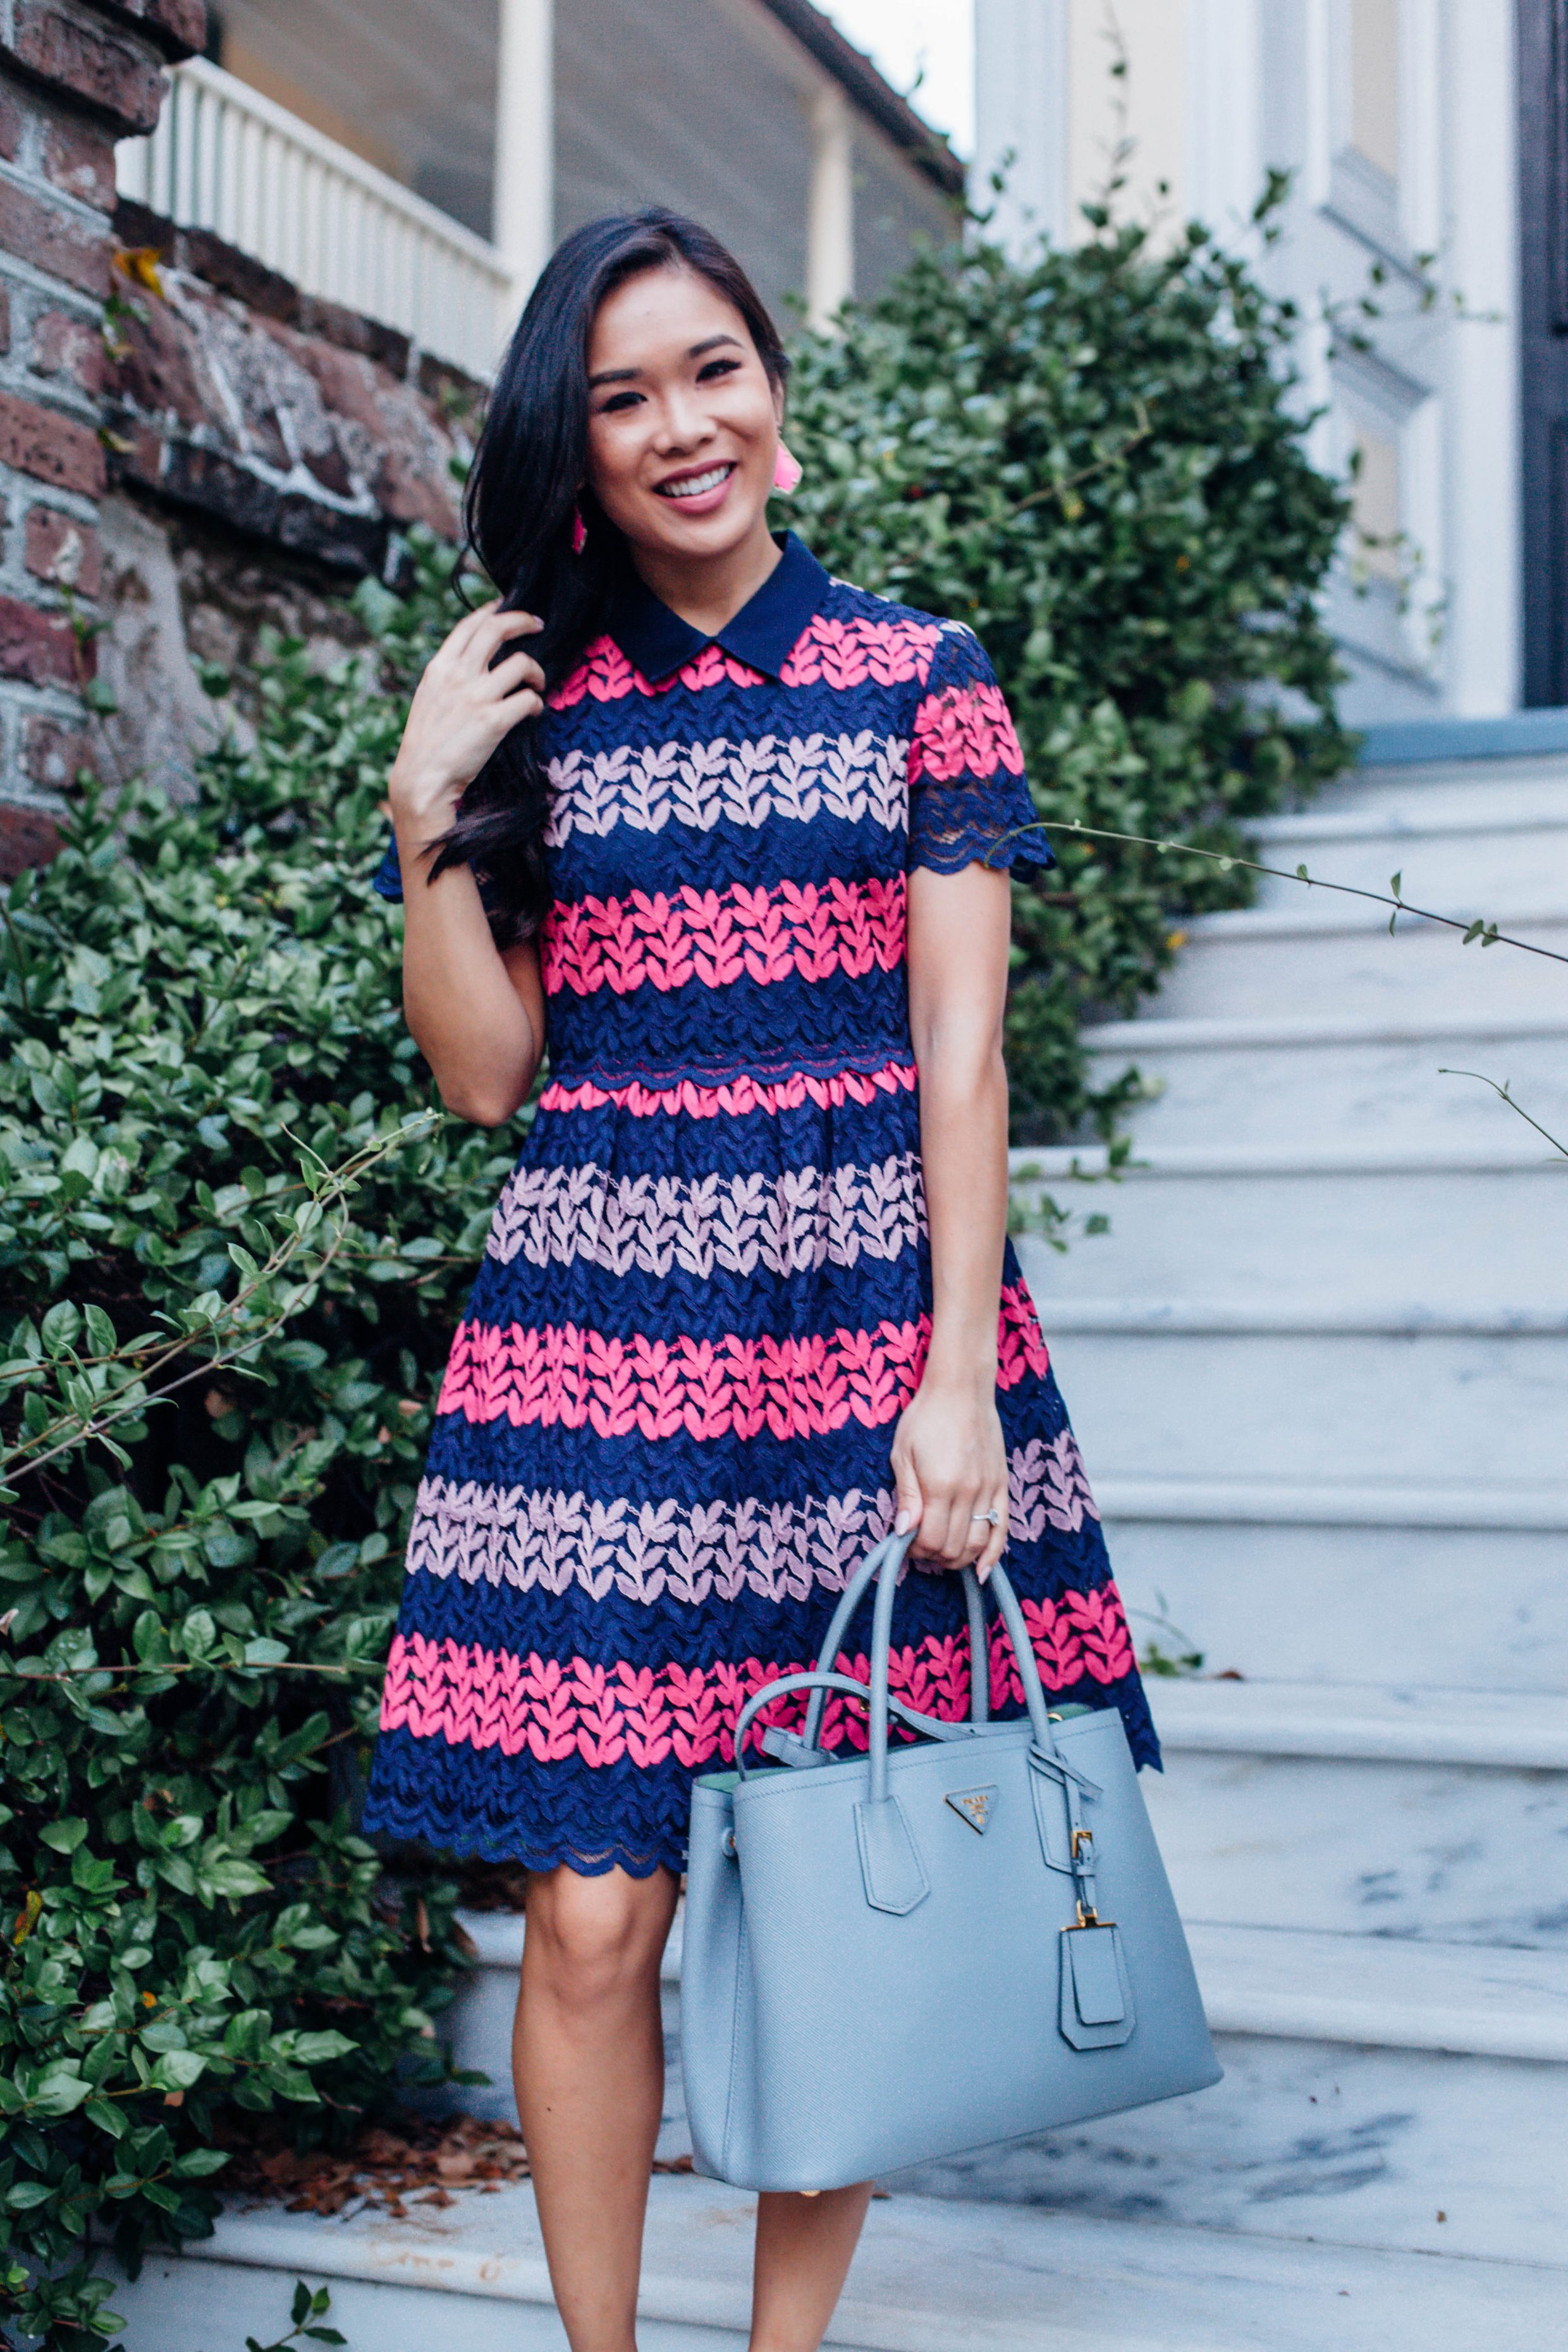 Leaf-Shaped Lace Dress for Fall :: Greetings from Charleston - Color & Chic